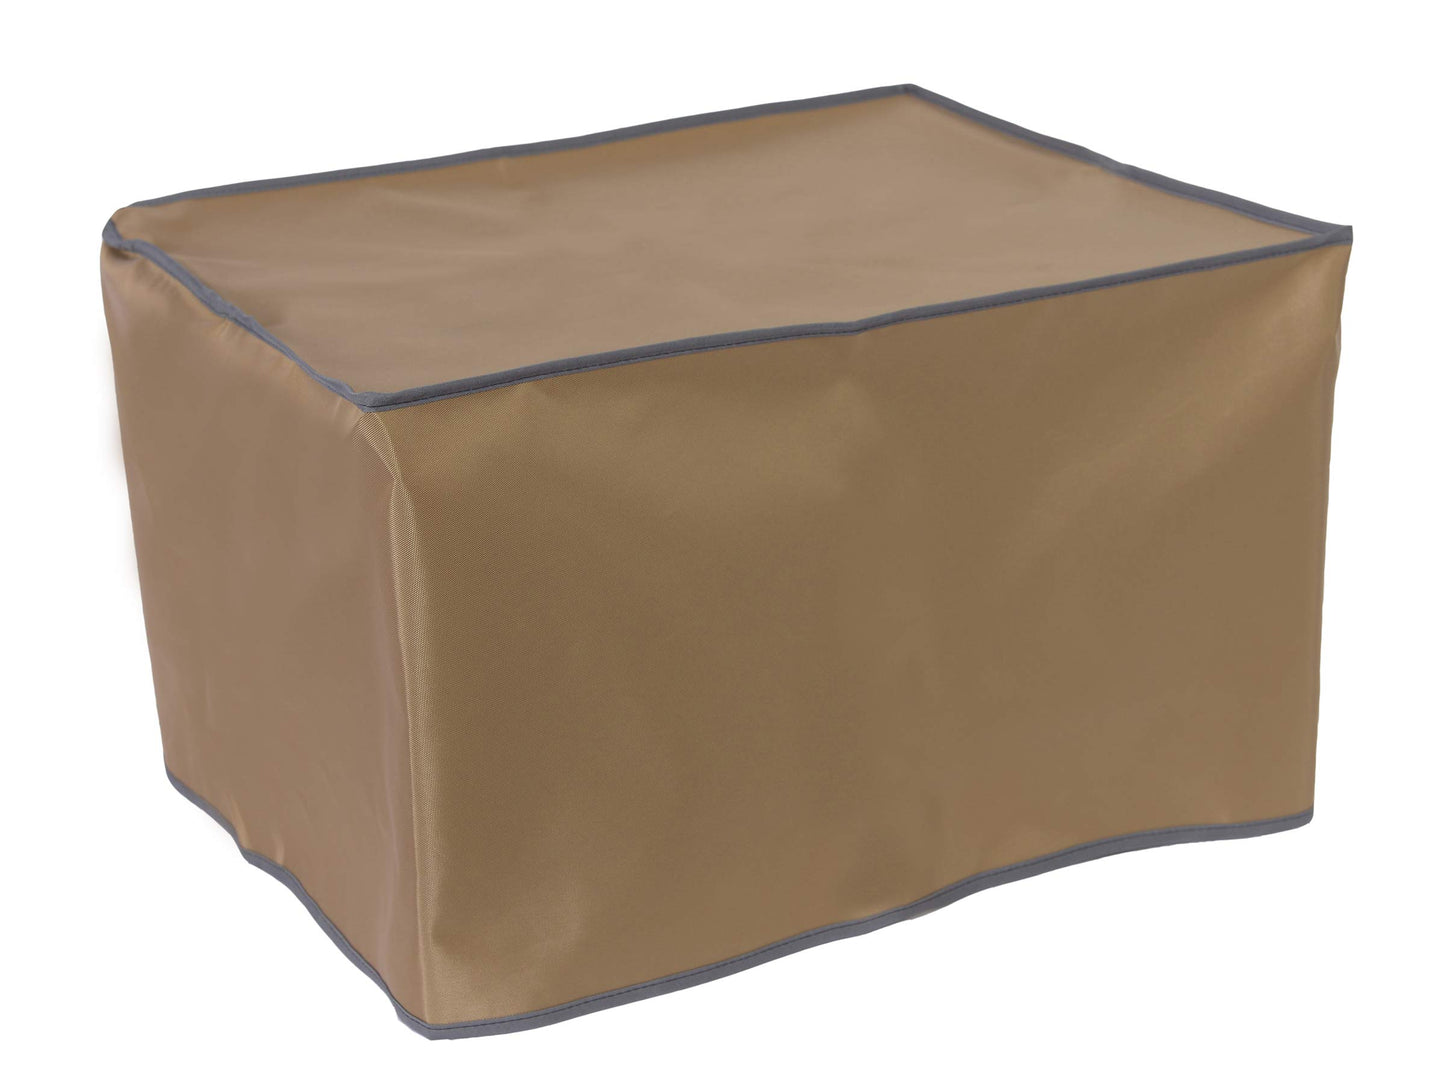 The Perfect Dust Cover, Tan Nylon Cover for HP Envy 5010 All-in-One Inkjet Printer, Anti Static and Waterproof Dimensions 17.52''W x 14.45''D x 5''H by The Perfect Dust Cover LLC